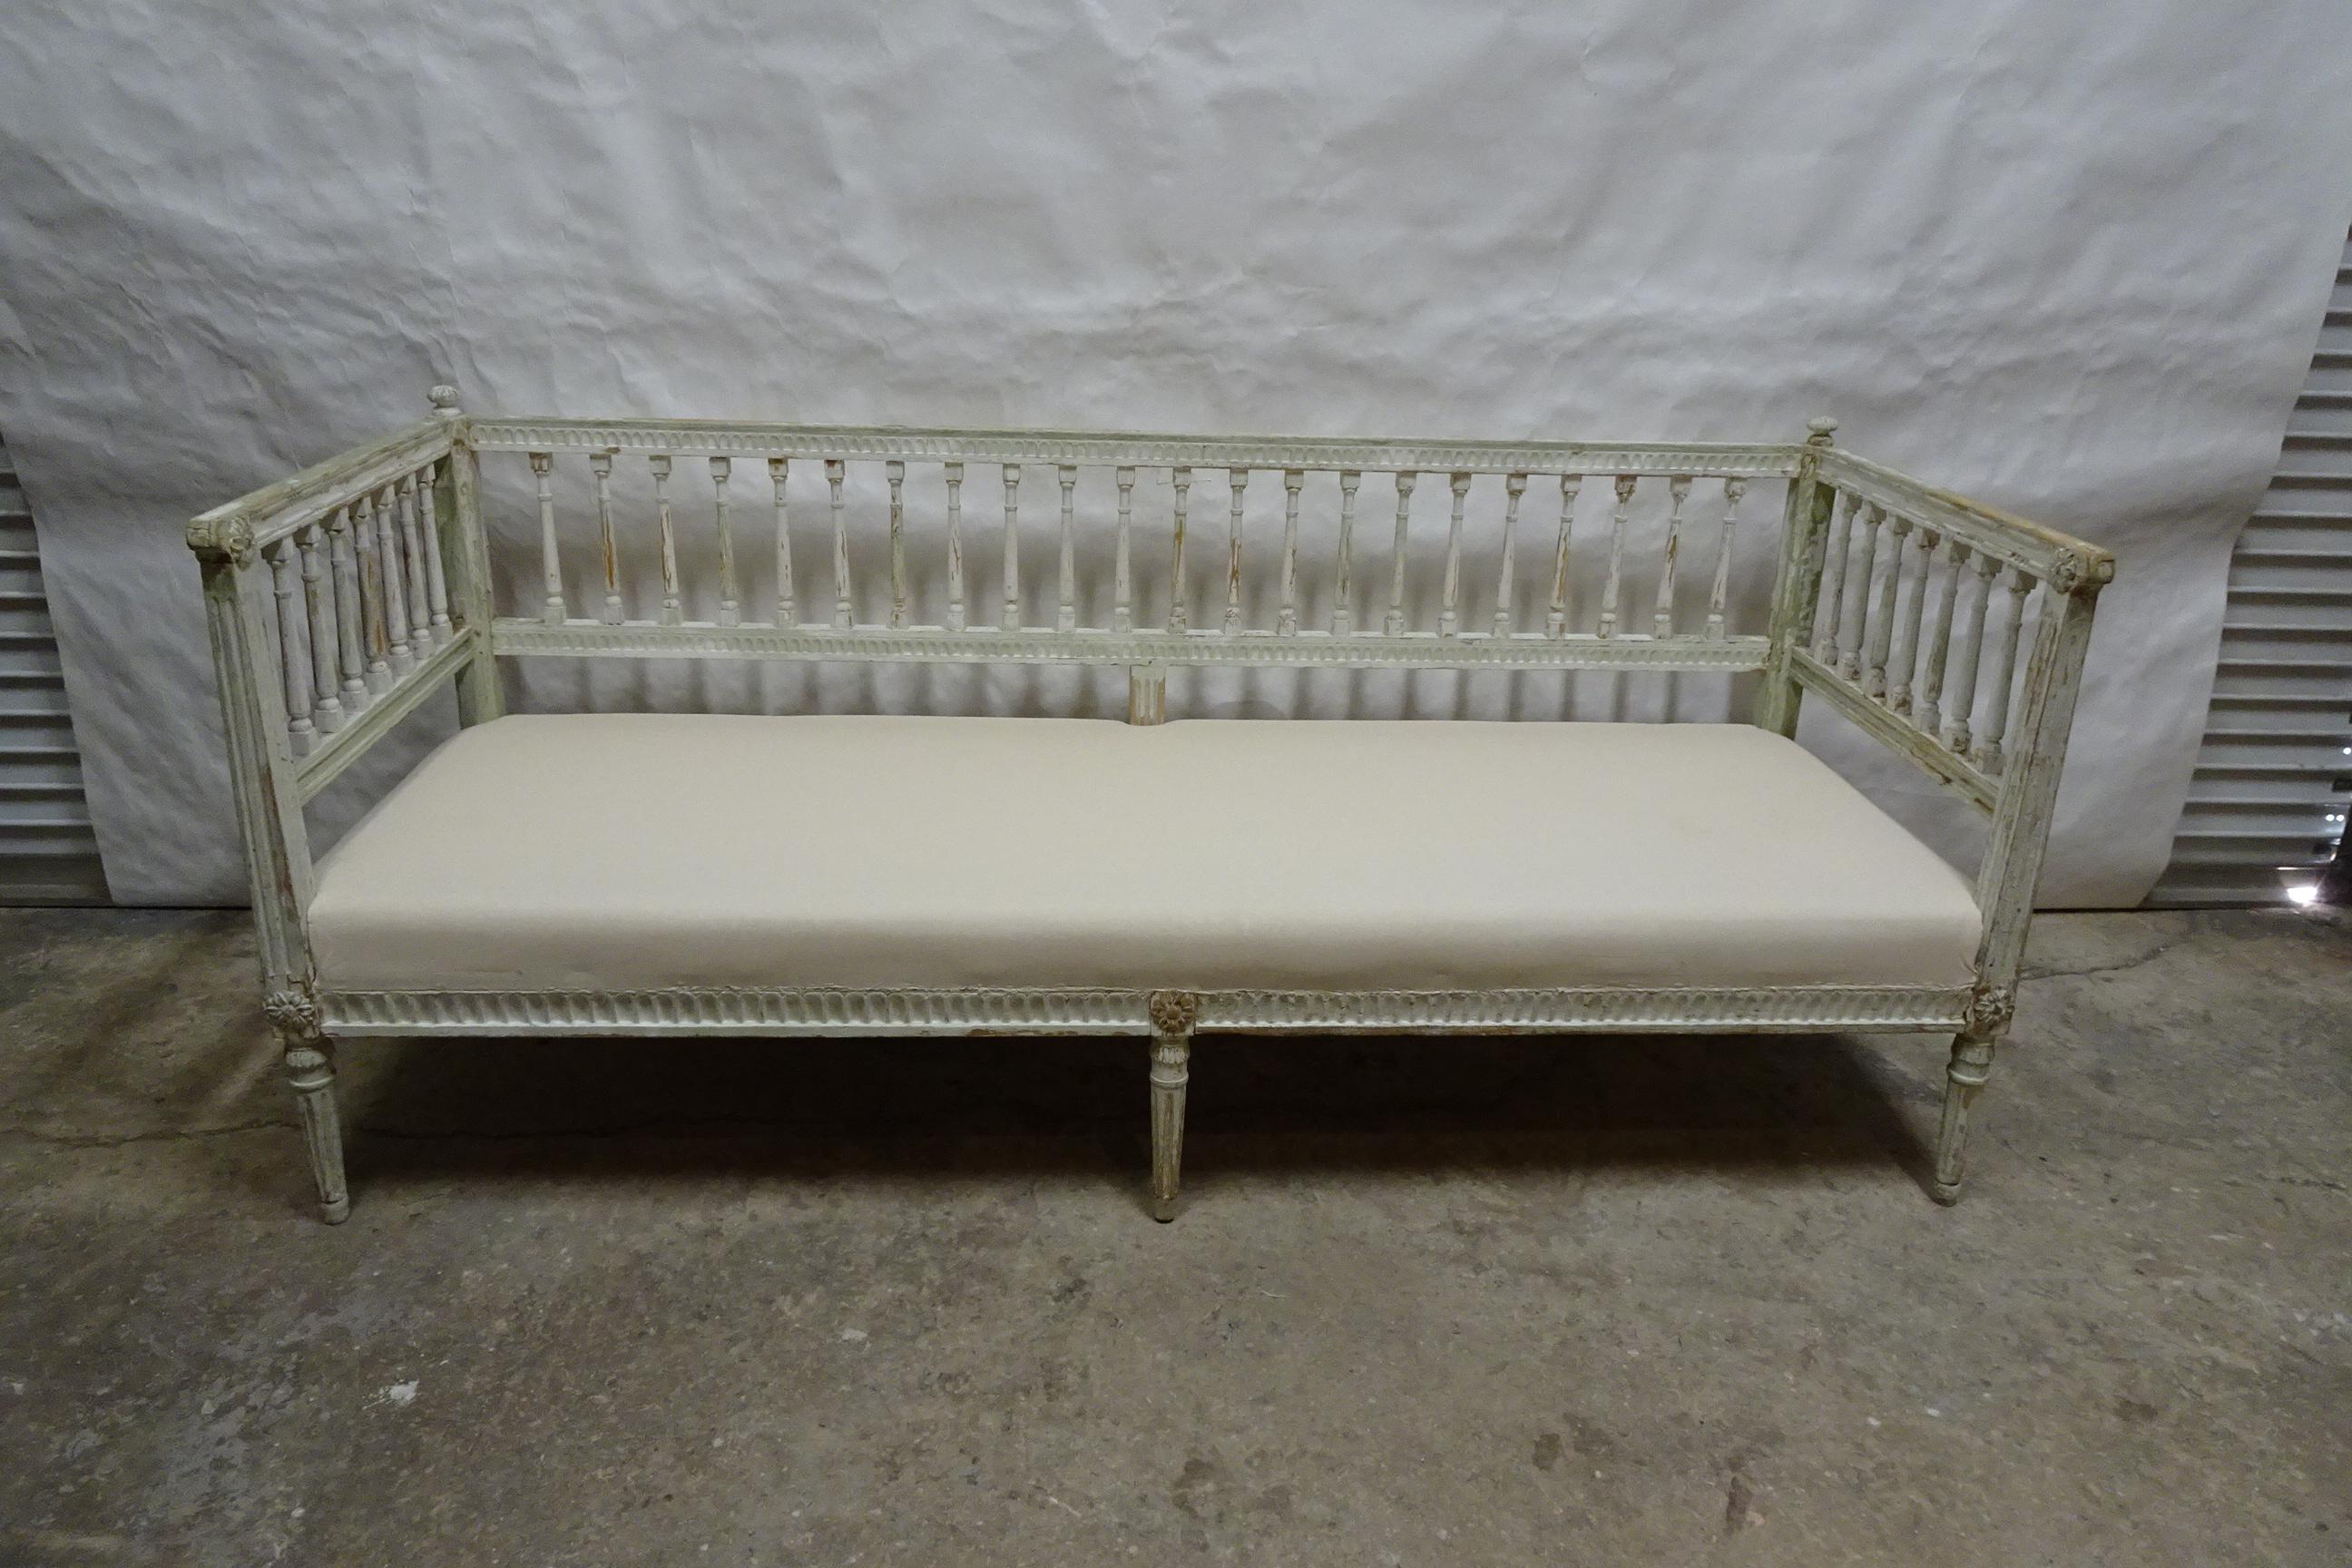 This is a Beautiful 100% Original Painted Swedish Gustavian Sofa. the seatinghas been restored and recovered in Muslin.